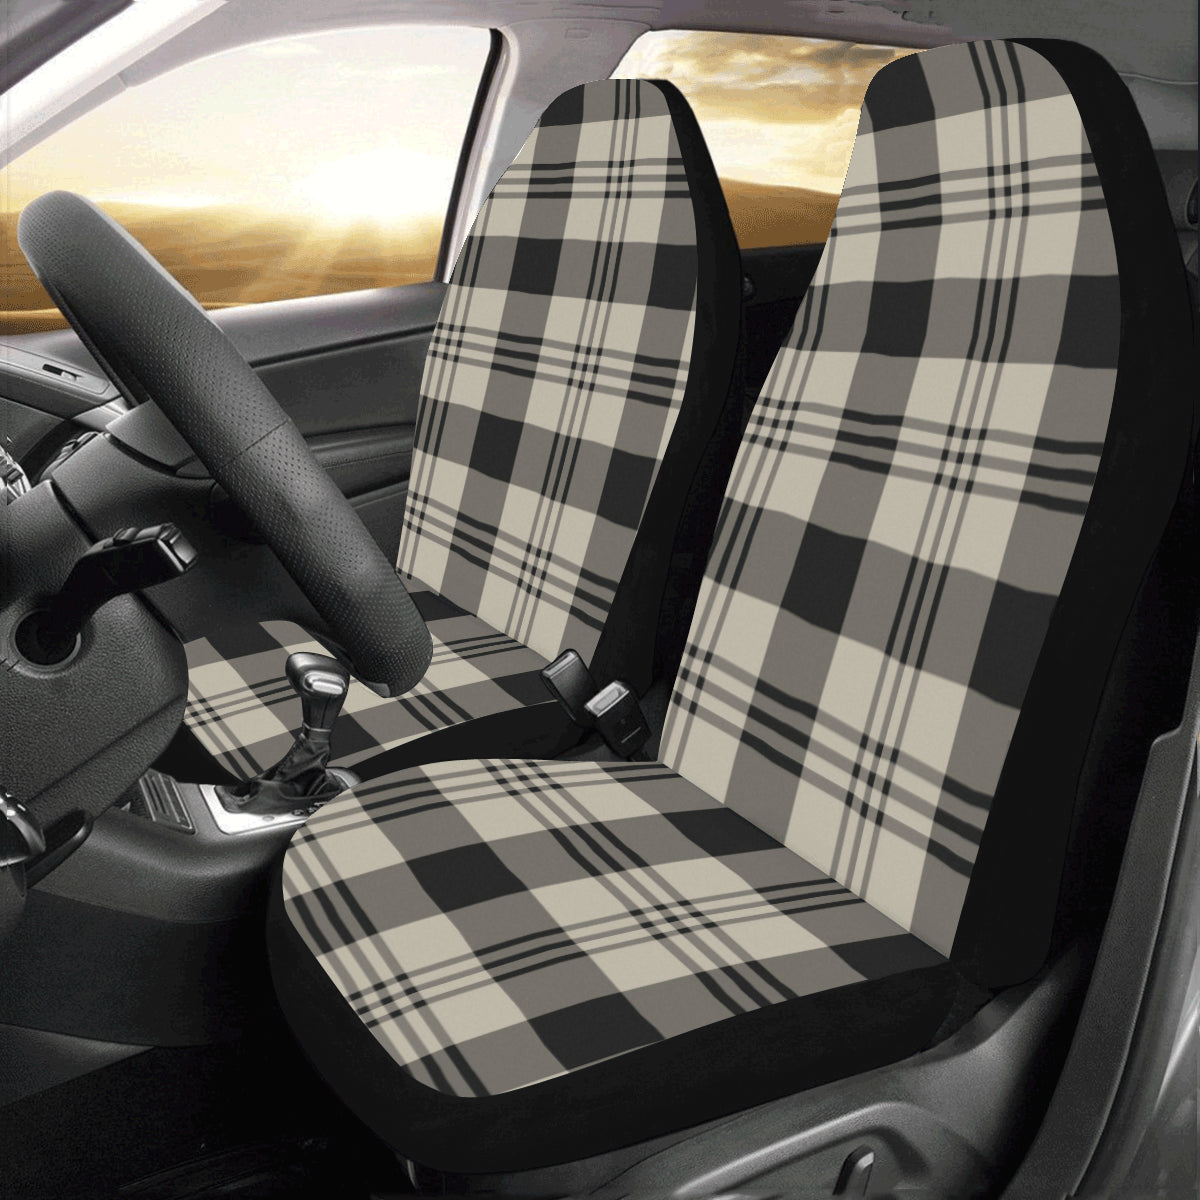 Buffalo Plaid Car Seat Covers 2 pc, Tartan Checks Black Beige Pattern Front Seat Covers, Car SUV Seat Protector Accessory Decoration Starcove Fashion